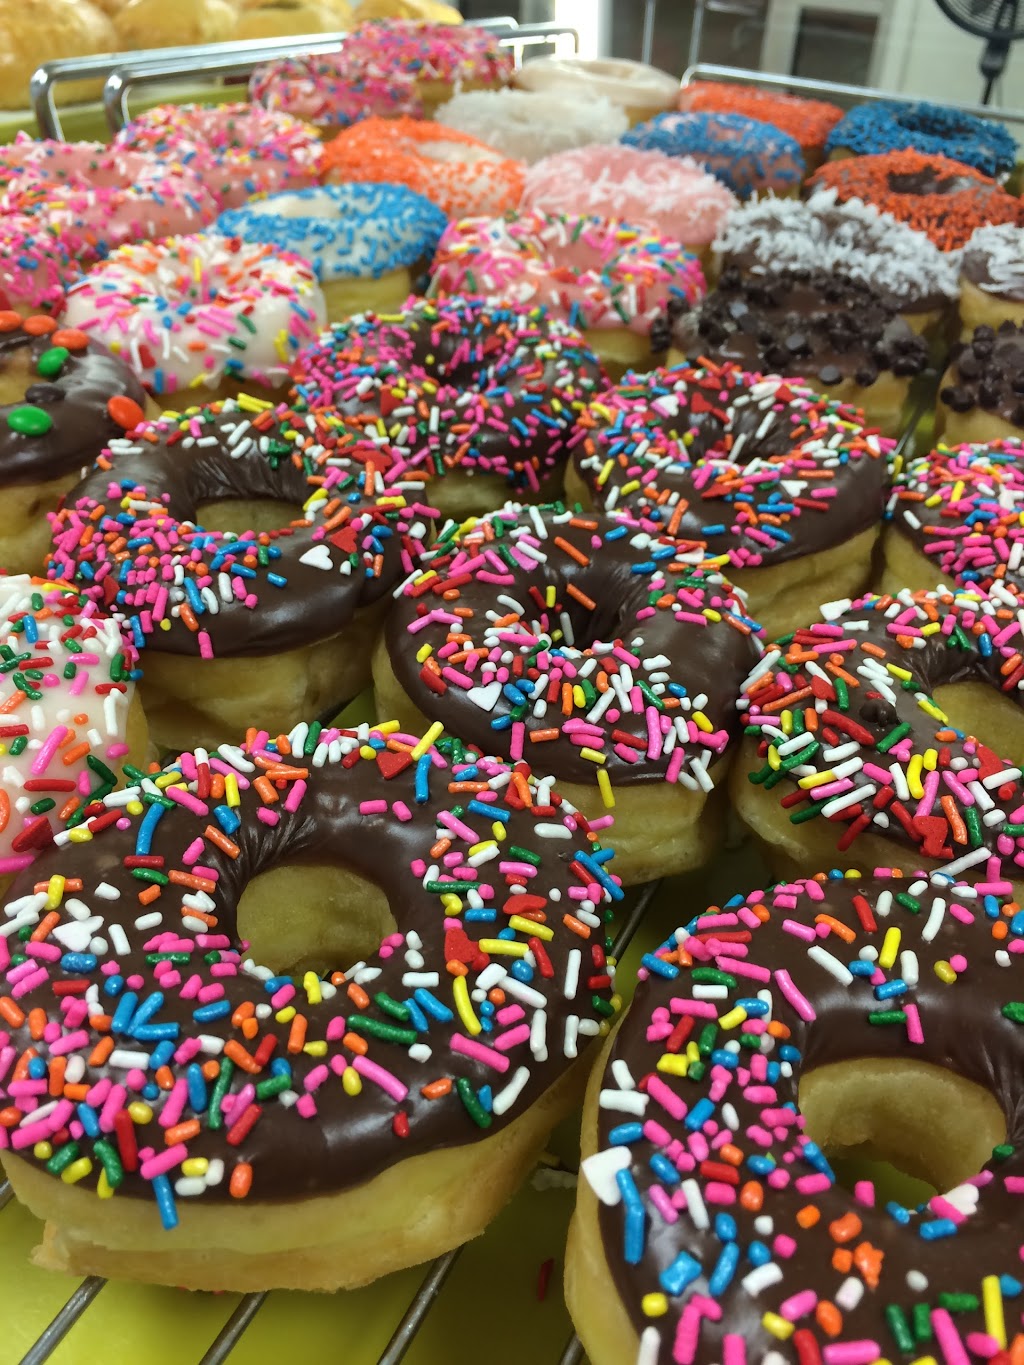 King Donuts | bakery | 584 N College St, Harrodsburg, KY 40330, USA | 8592655009 OR +1 859-265-5009